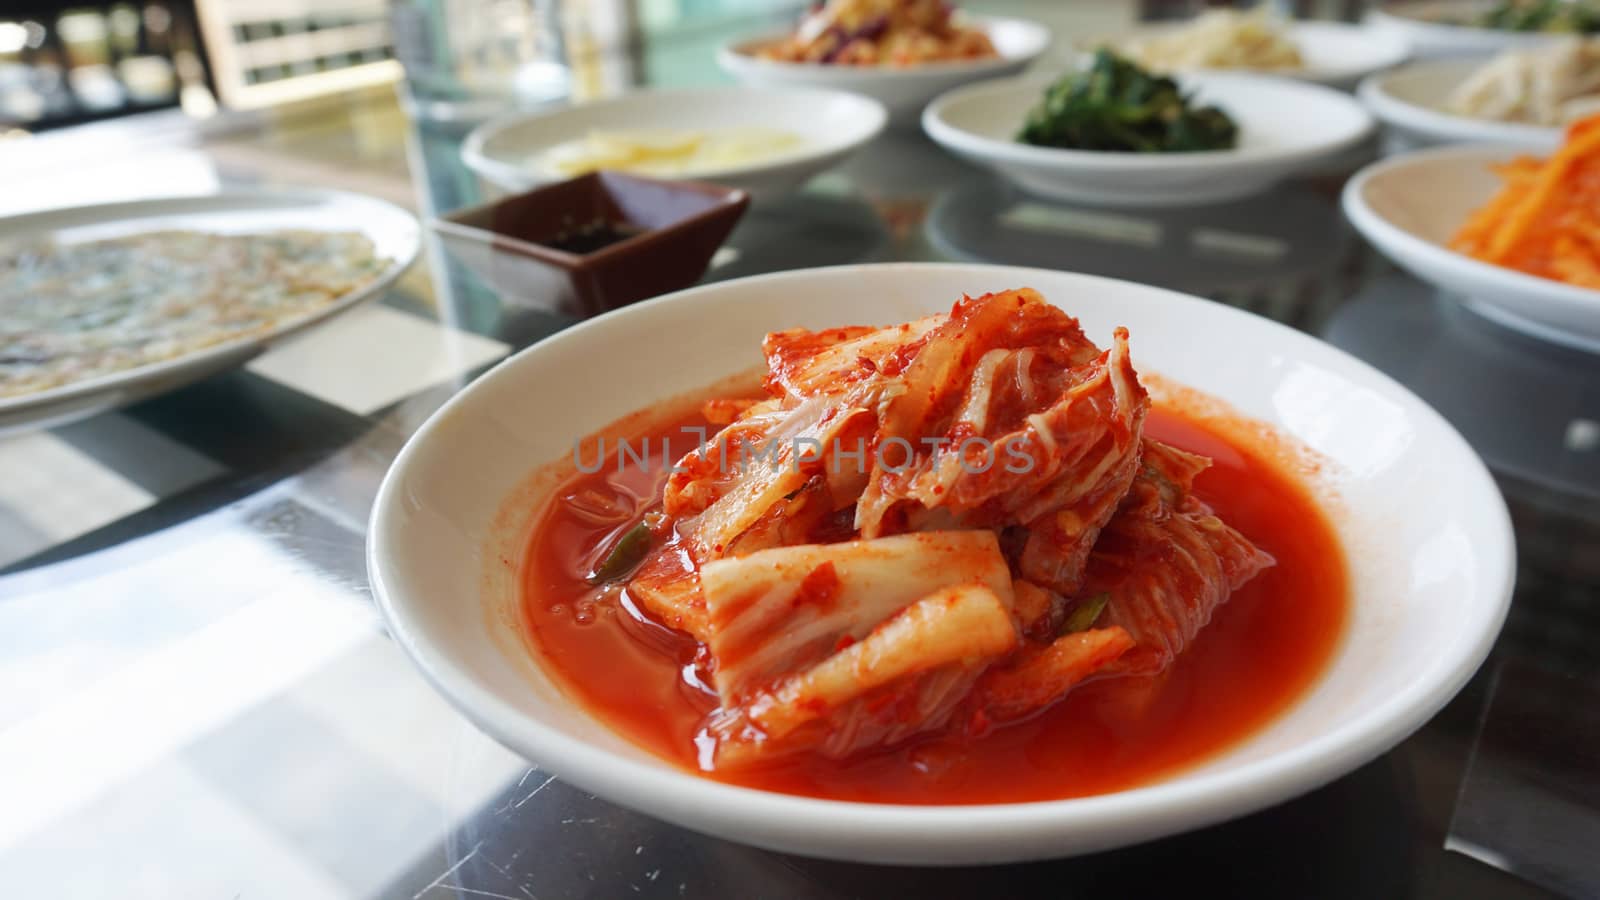 Kimchi is Traditional Korean side dish , fermented vegetables